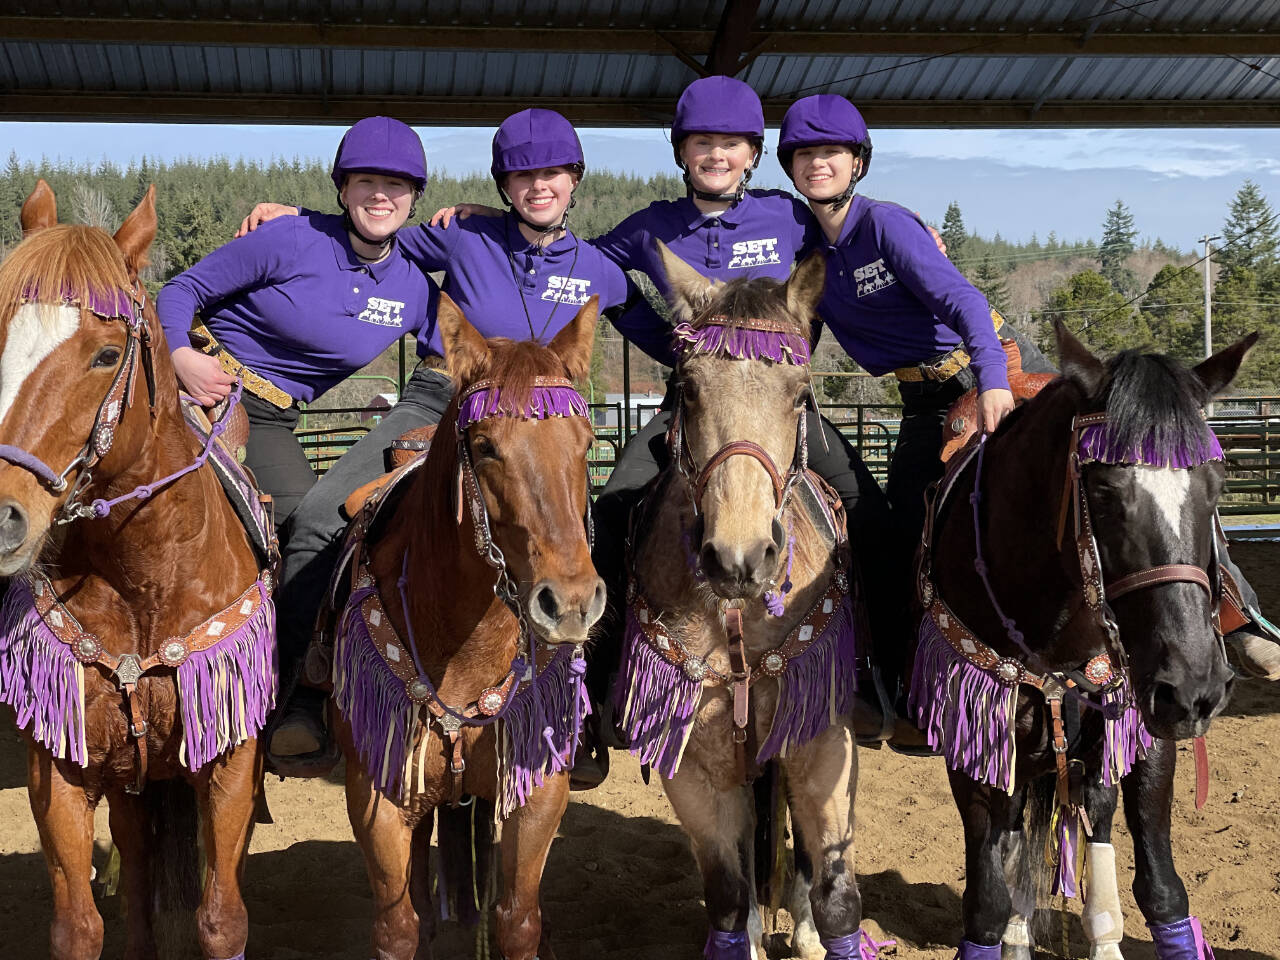 Submitted photo / Sequim’s drill freestyle fours team — from left, Paige Reed, Libby Swanberg, Kennady Gilbertson and Sydney Hutton, took first place at the team’s second distirct meet, held Feb. 24-26 in Elma.